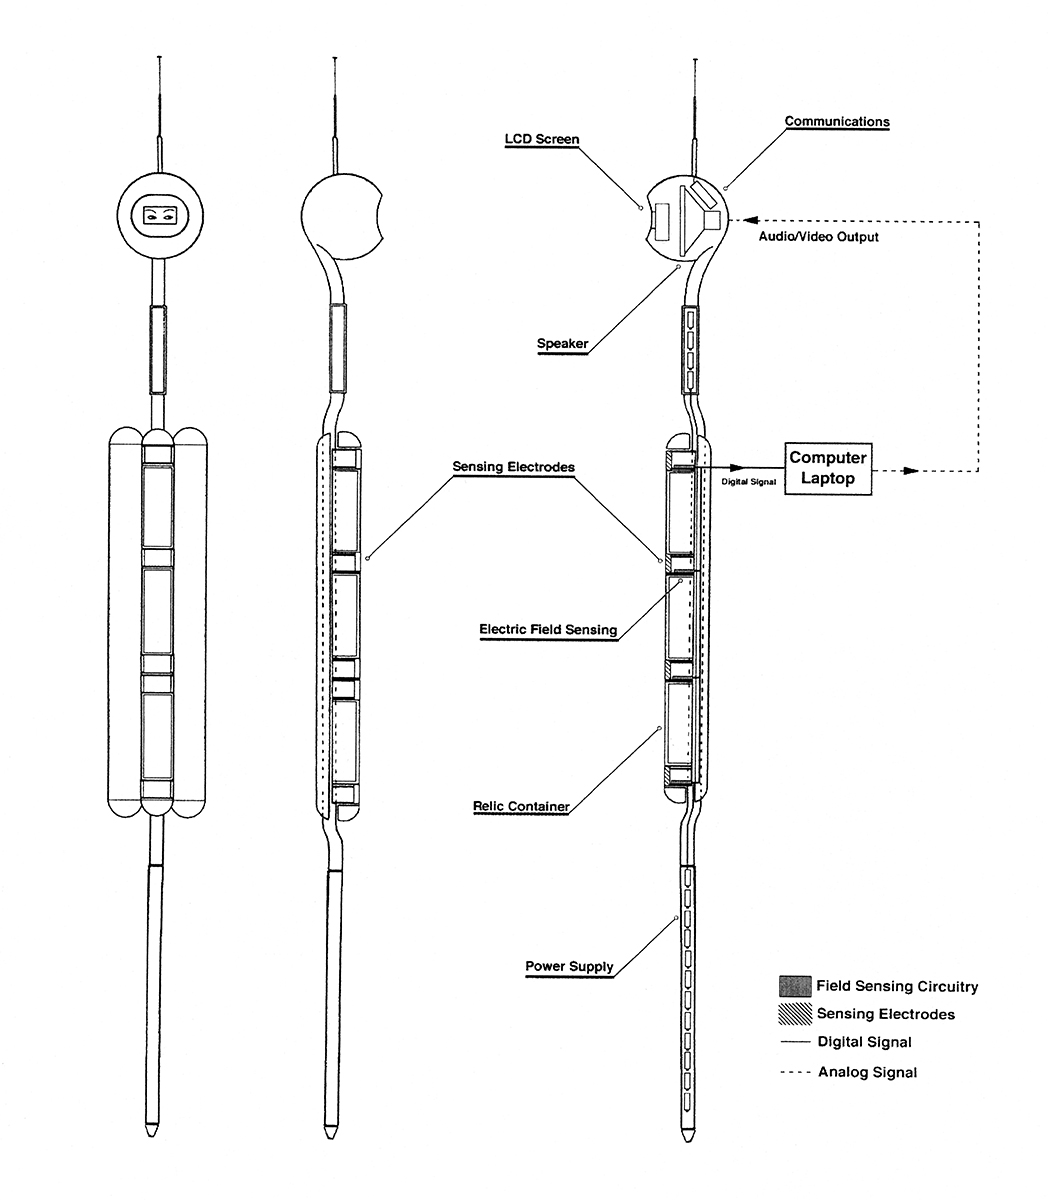 Line drawing diagram of the Alien Staff showing layout of the electronic features.